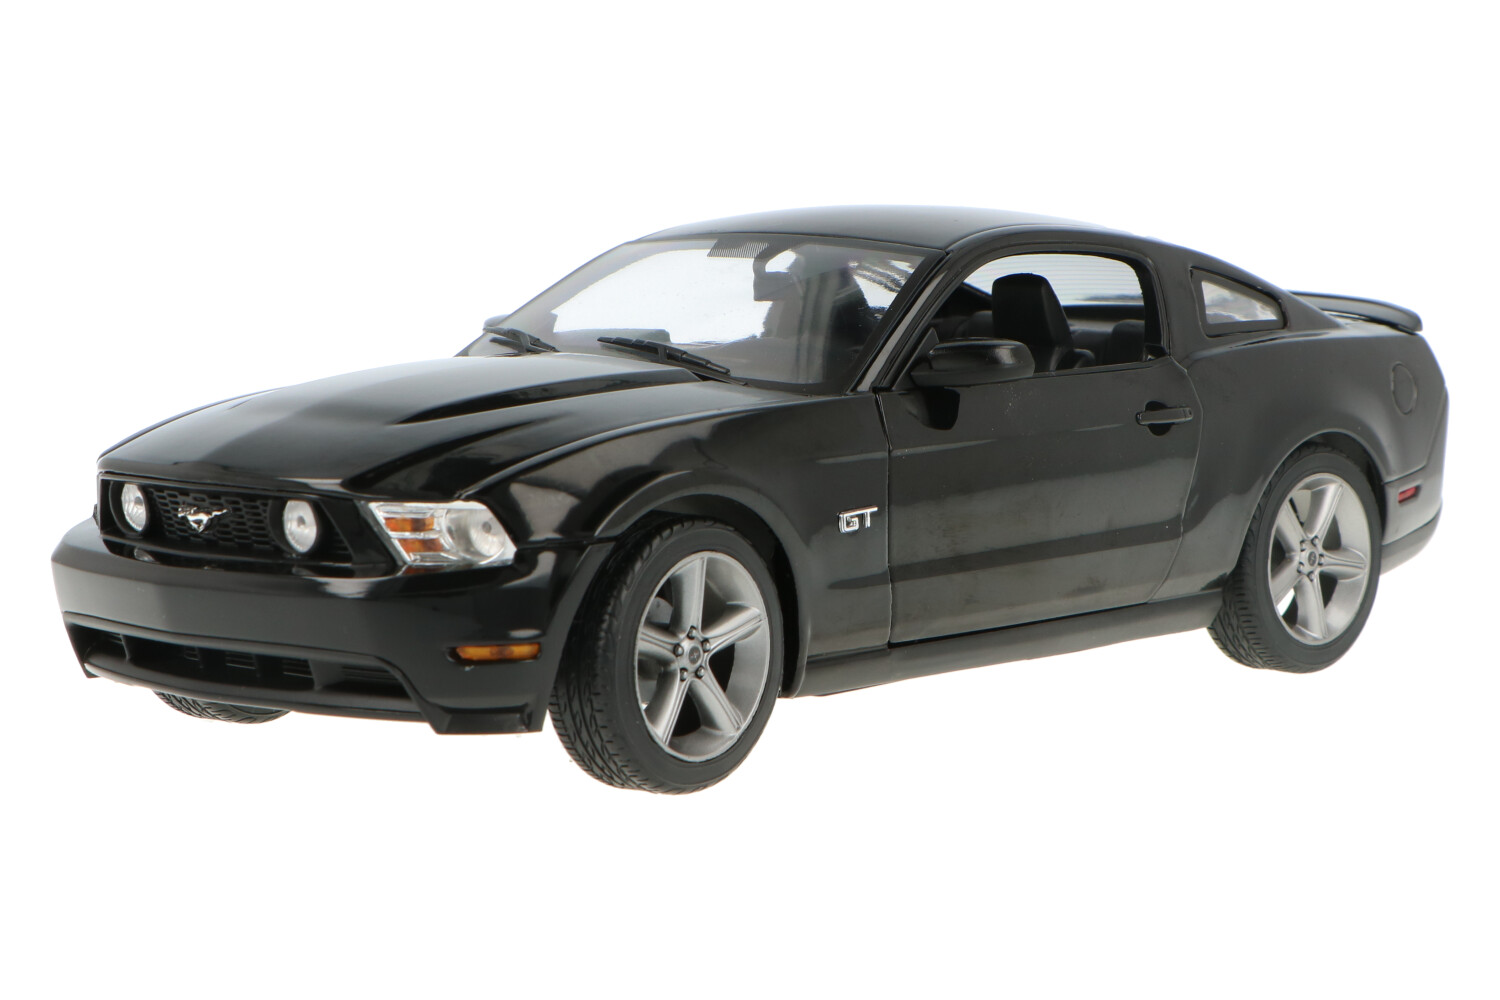 Ford-Mustang-GT-12869_1315810166016728Ford-Mustang-GT-12869_Houseofmodelcars_.jpg